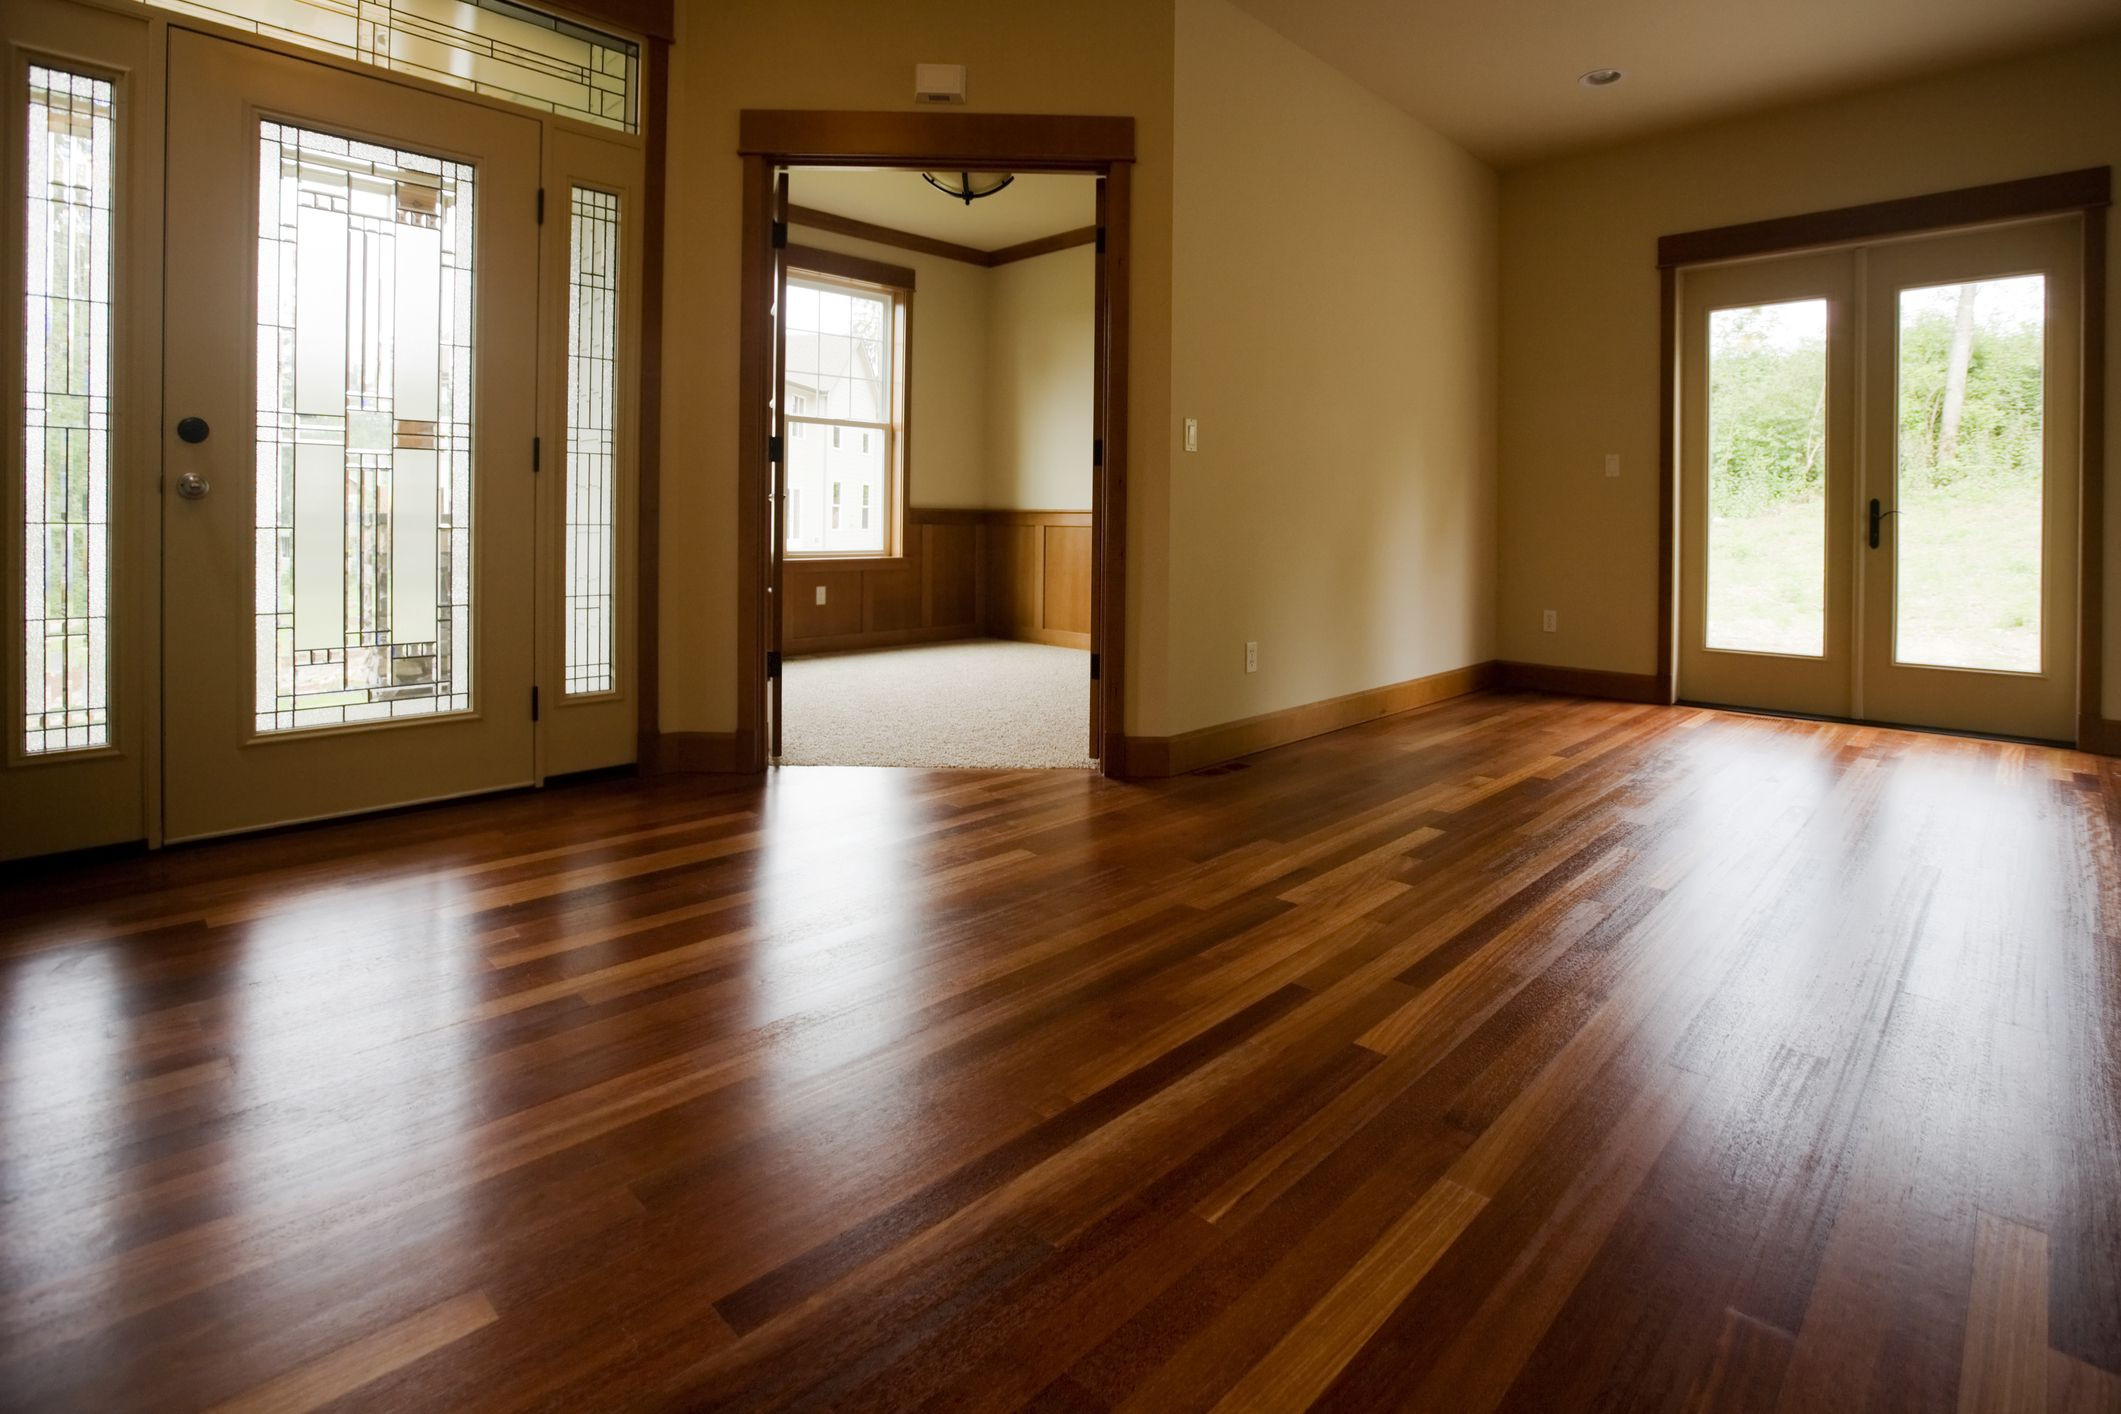 30 Popular Hardness Of Hardwood Flooring Types 2022 free download hardness of hardwood flooring types of types of hardwood flooring buyers guide throughout gettyimages 157332889 5886d8383df78c2ccd65d4e1